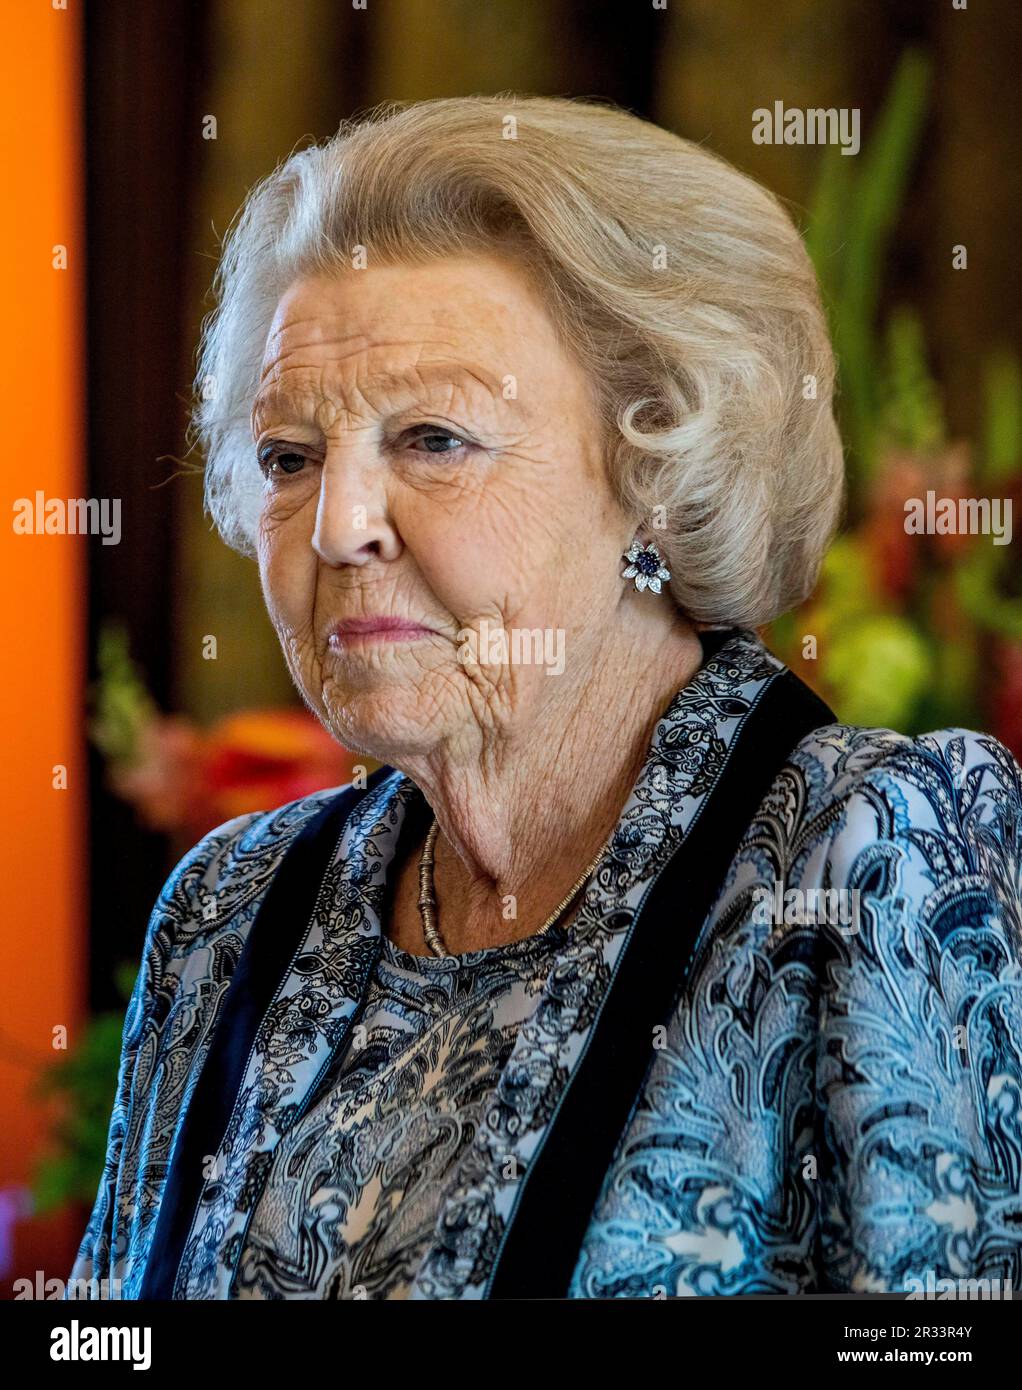 Princess Beatrix of The Netherlands at the City Hall in Leiden, on May 22, 2023, to award the Jantje Beton Prijs. Jantje Beton awards this prize to the most play-friendly municipality in the Netherlands Photo: Albert Nieboer/Netherlands OUT/Point De Vue OUT Stock Photo